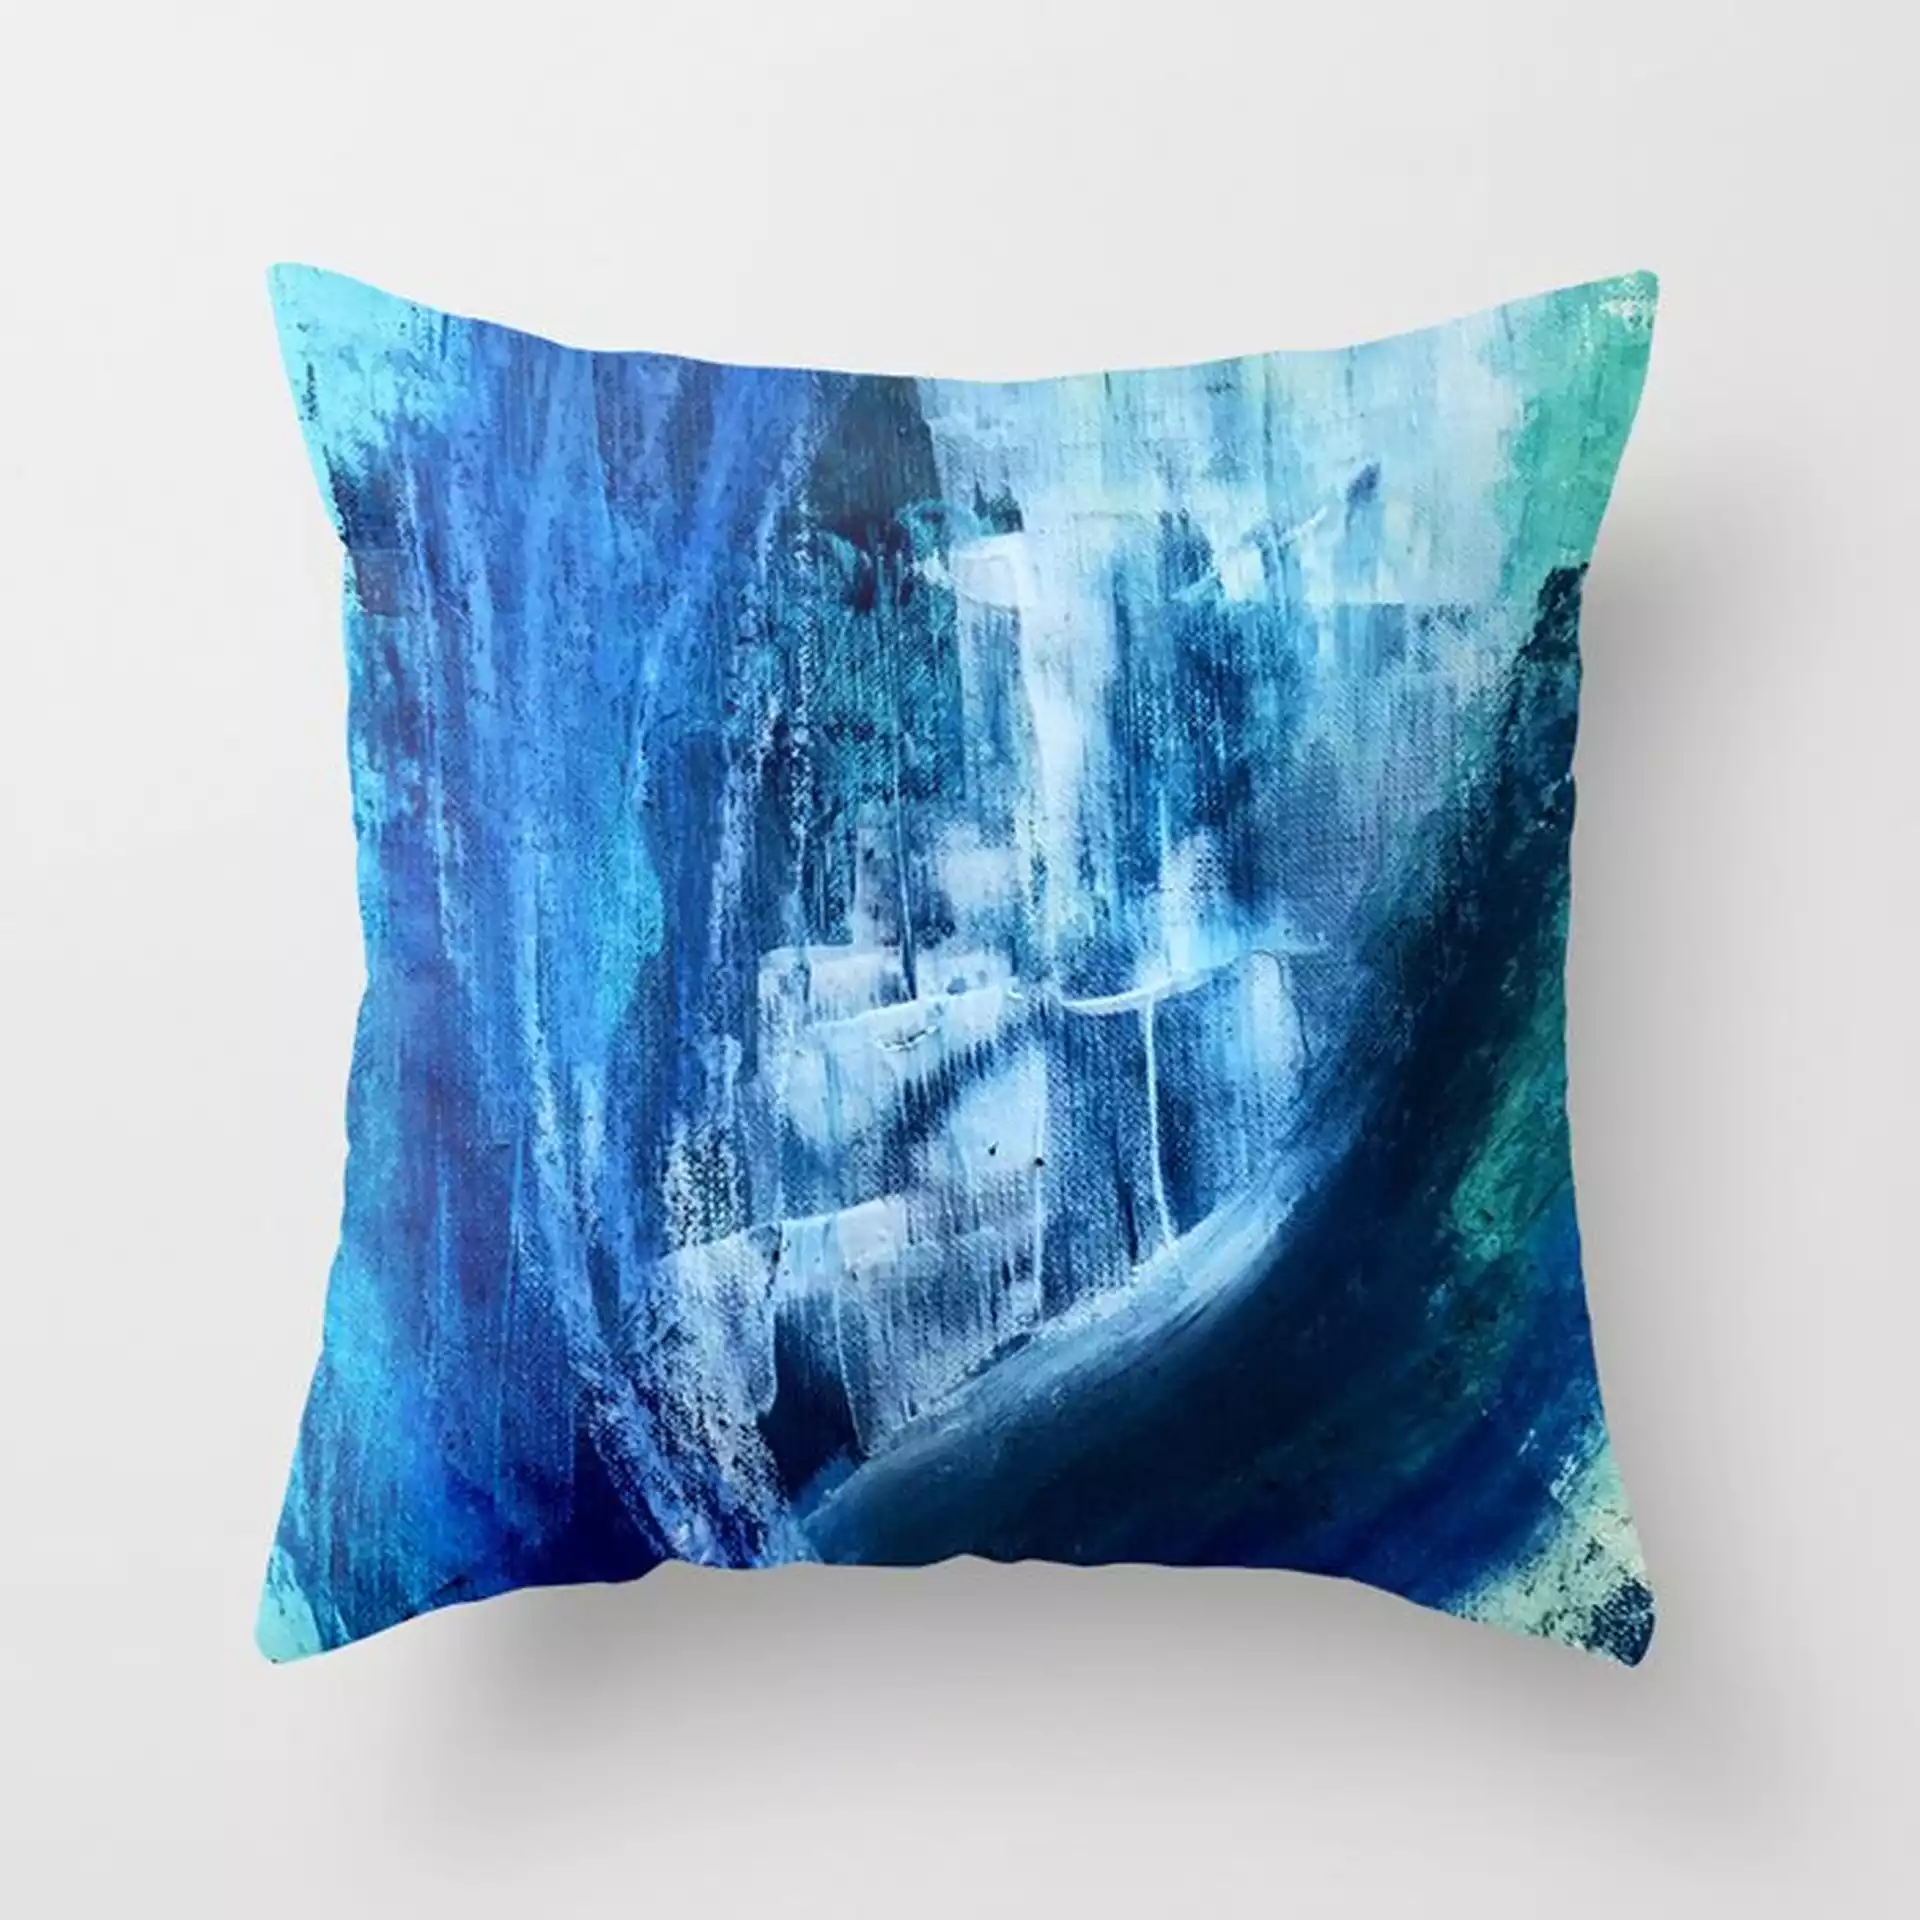 Cerulean [5]: A Vibrant Blue Abstract With Texture And Layers Couch Throw Pillow by Alyssa Hamilton Art - Cover (16" x 16") with pillow insert - Outdoor Pillow